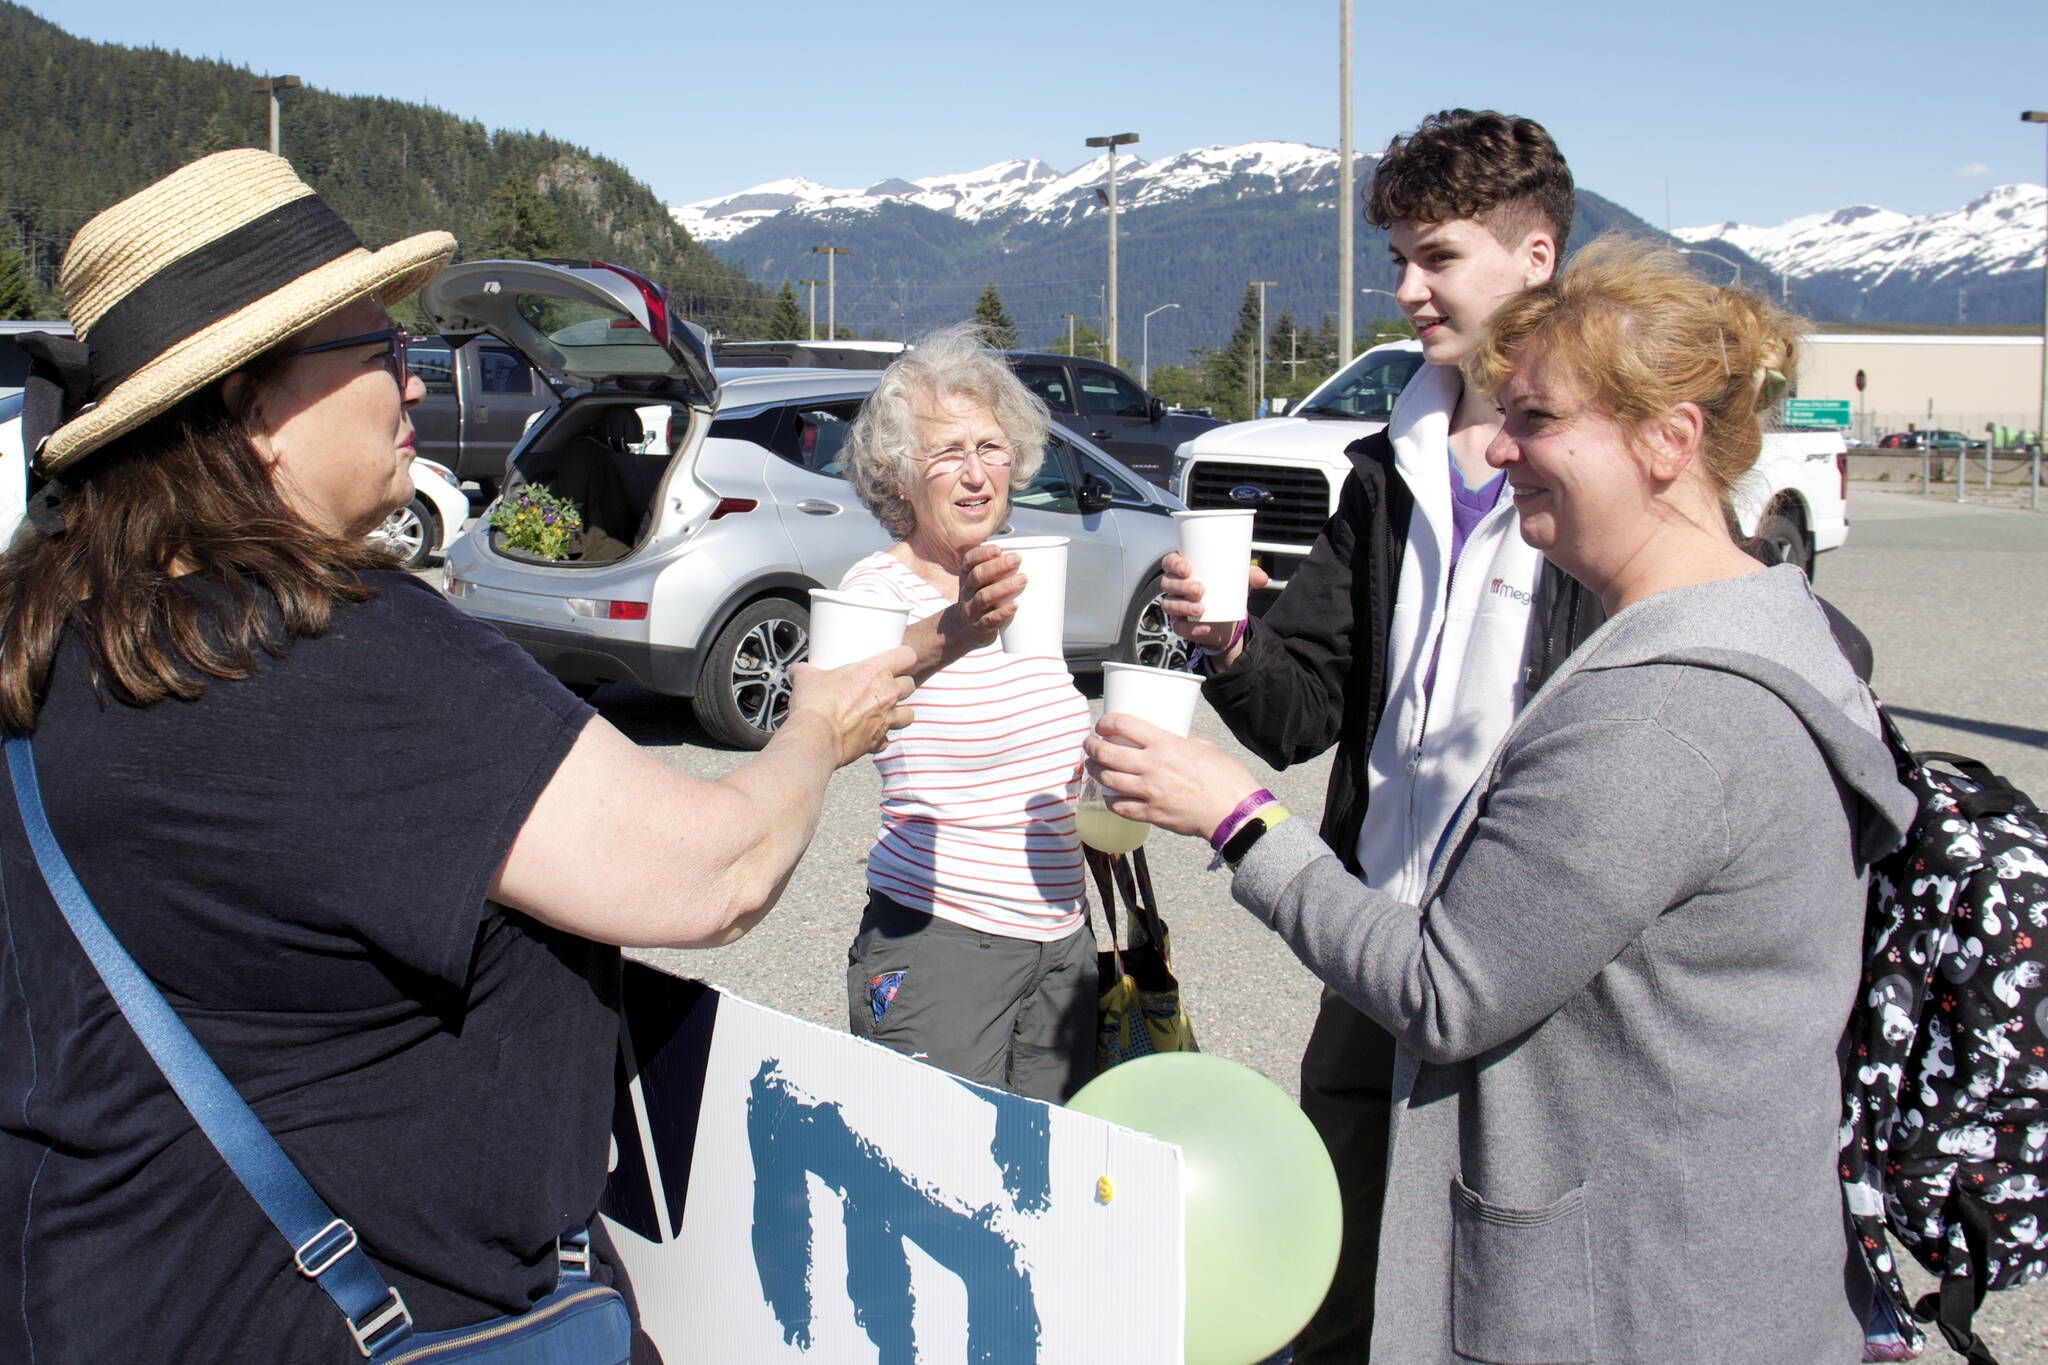 Mark Sabbatini / Juneau Empire 
Iryna Hrynchenko and her 18 year old son, Ivan Hrynchenko, 18, Joyanne Bloom and Bridget Smith toast to the Ukrainians’ arrival Saturday at Juneau International Airport. Bloom and Smith are part of a five-person group of residents who raised funds to bring the Hrynchenkos to Juneau, and is helping them with housing, education and job opportunities, and in other ways.